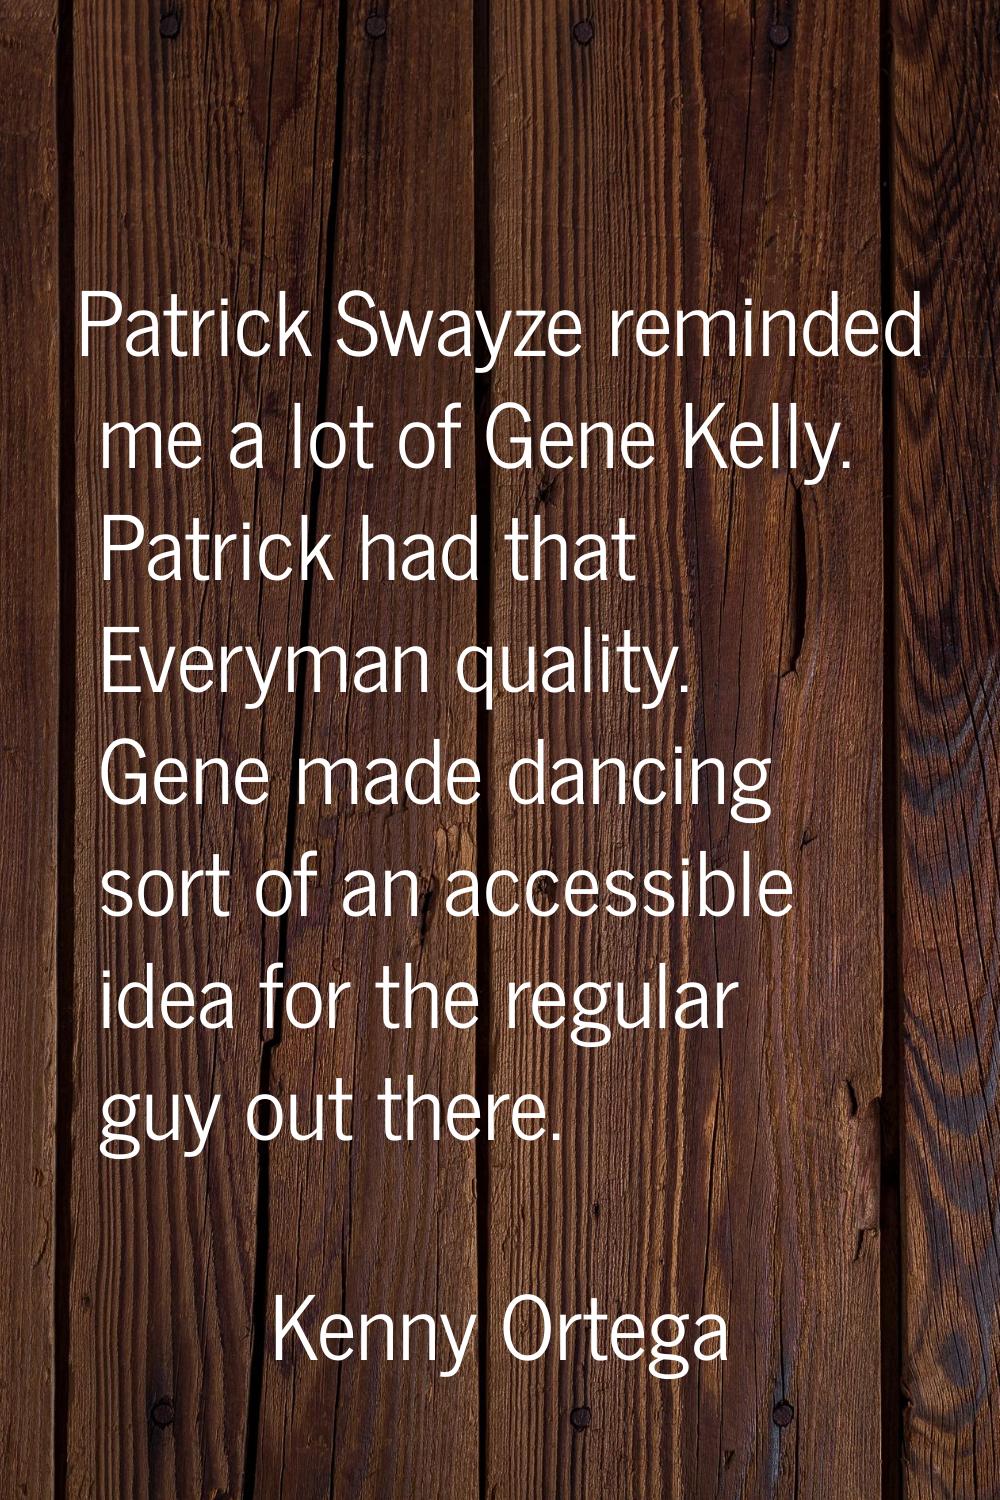 Patrick Swayze reminded me a lot of Gene Kelly. Patrick had that Everyman quality. Gene made dancin